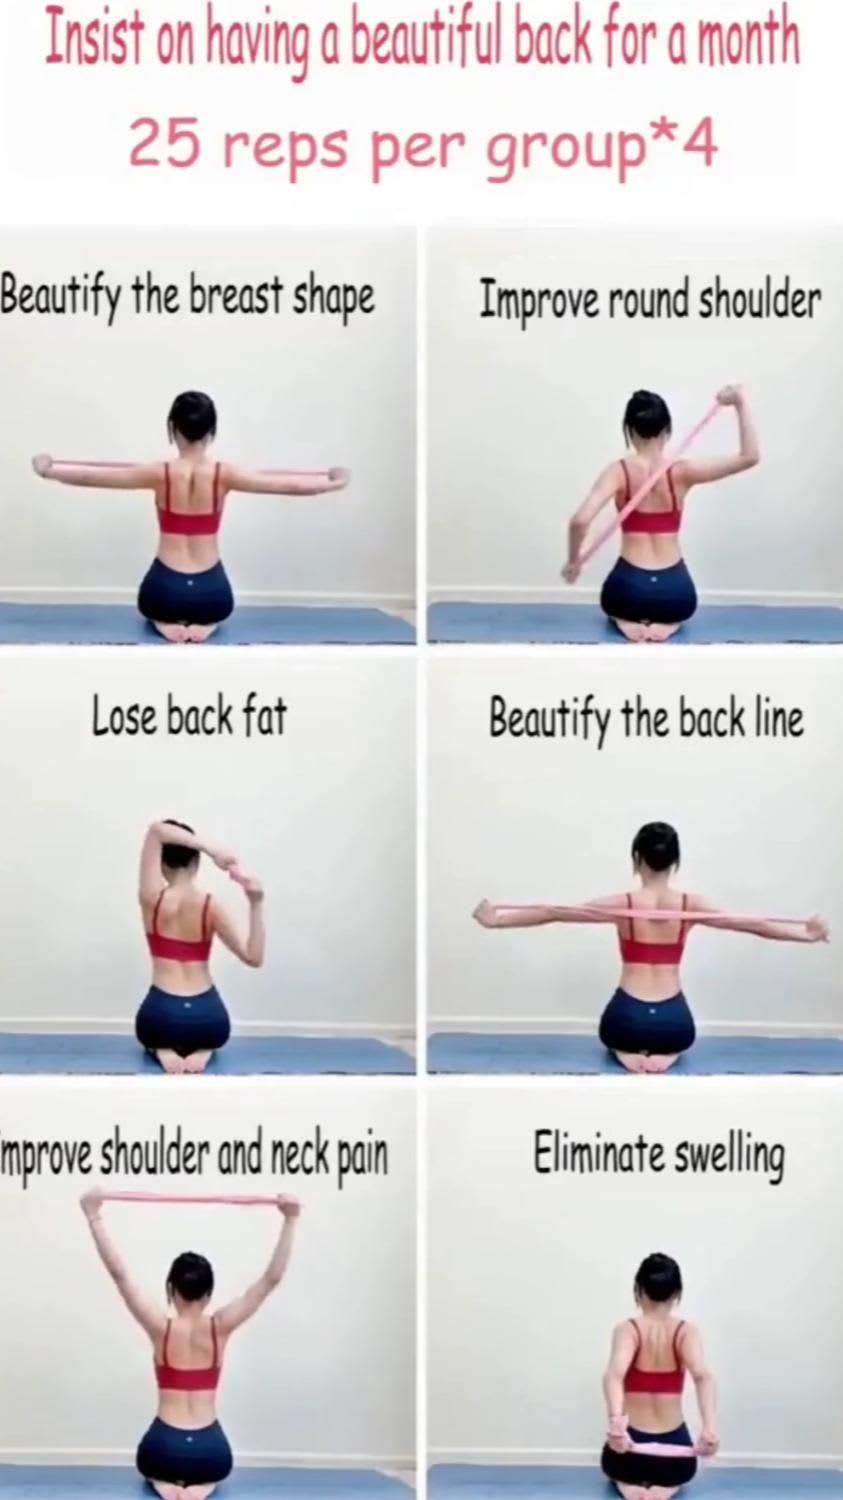 Easy exercise for beautiful back for a month